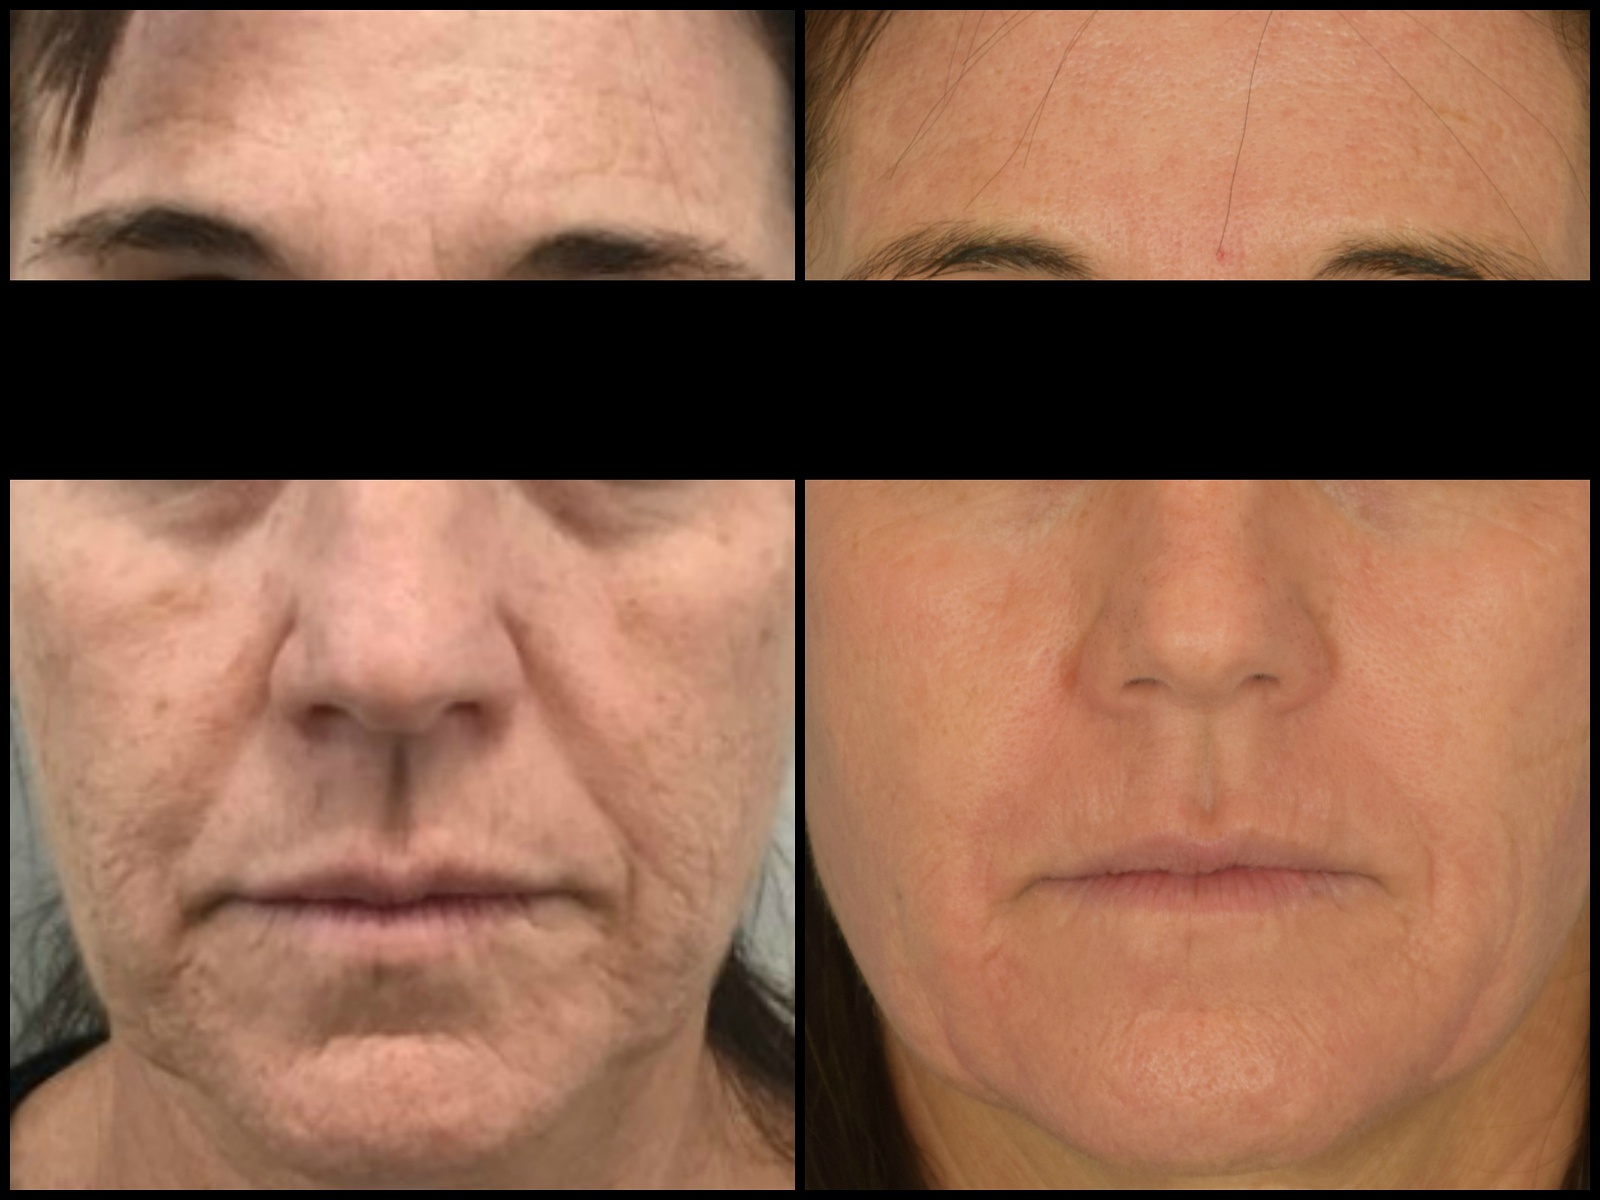 Woman's face, before and after Laser Treatment – CO2RE, front view